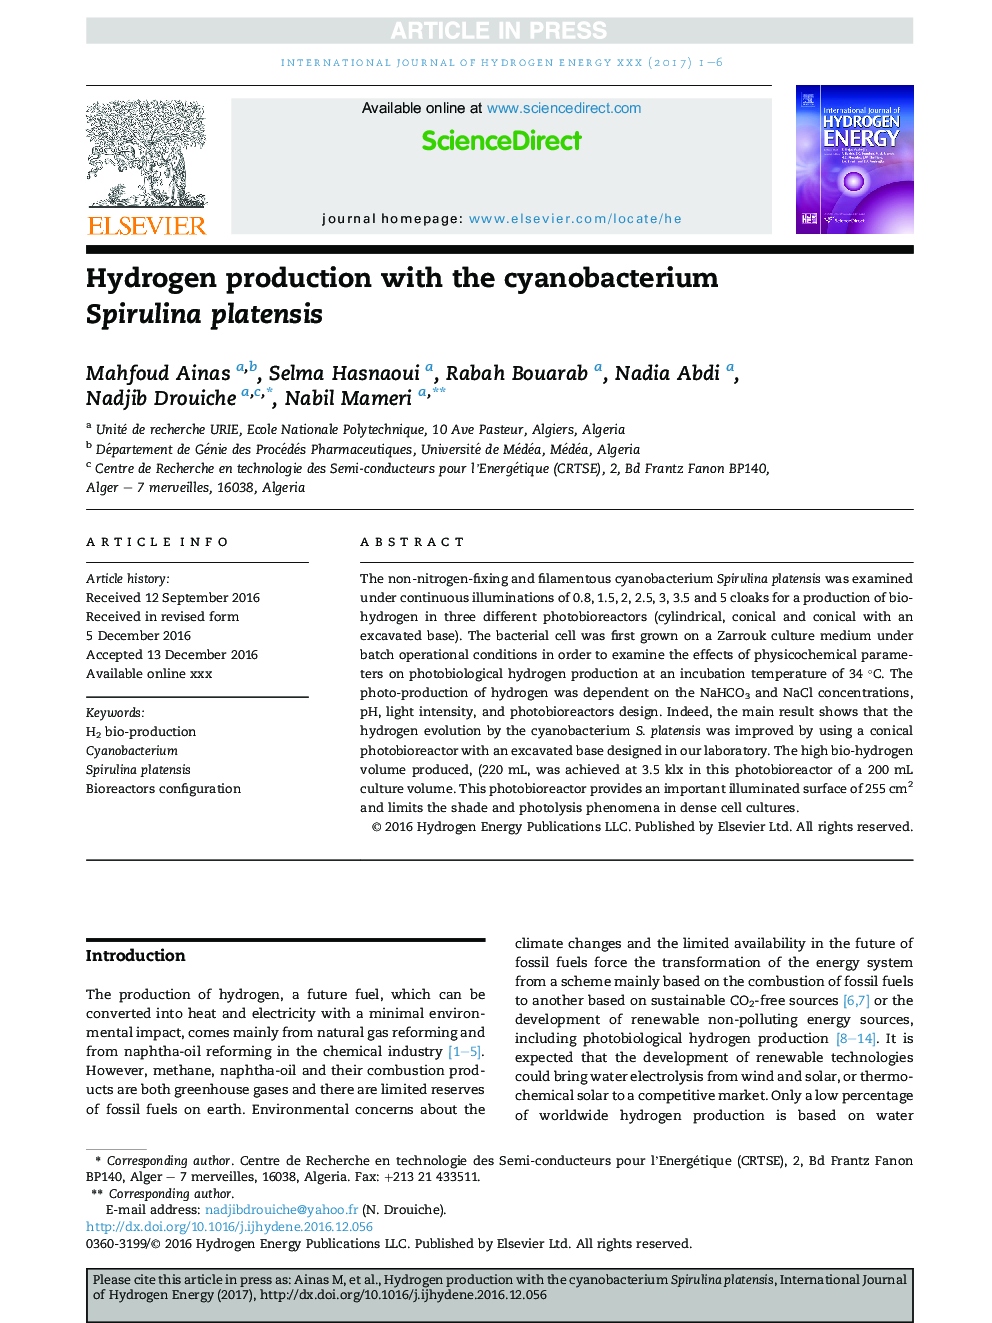 Hydrogen production with the cyanobacterium Spirulina platensis